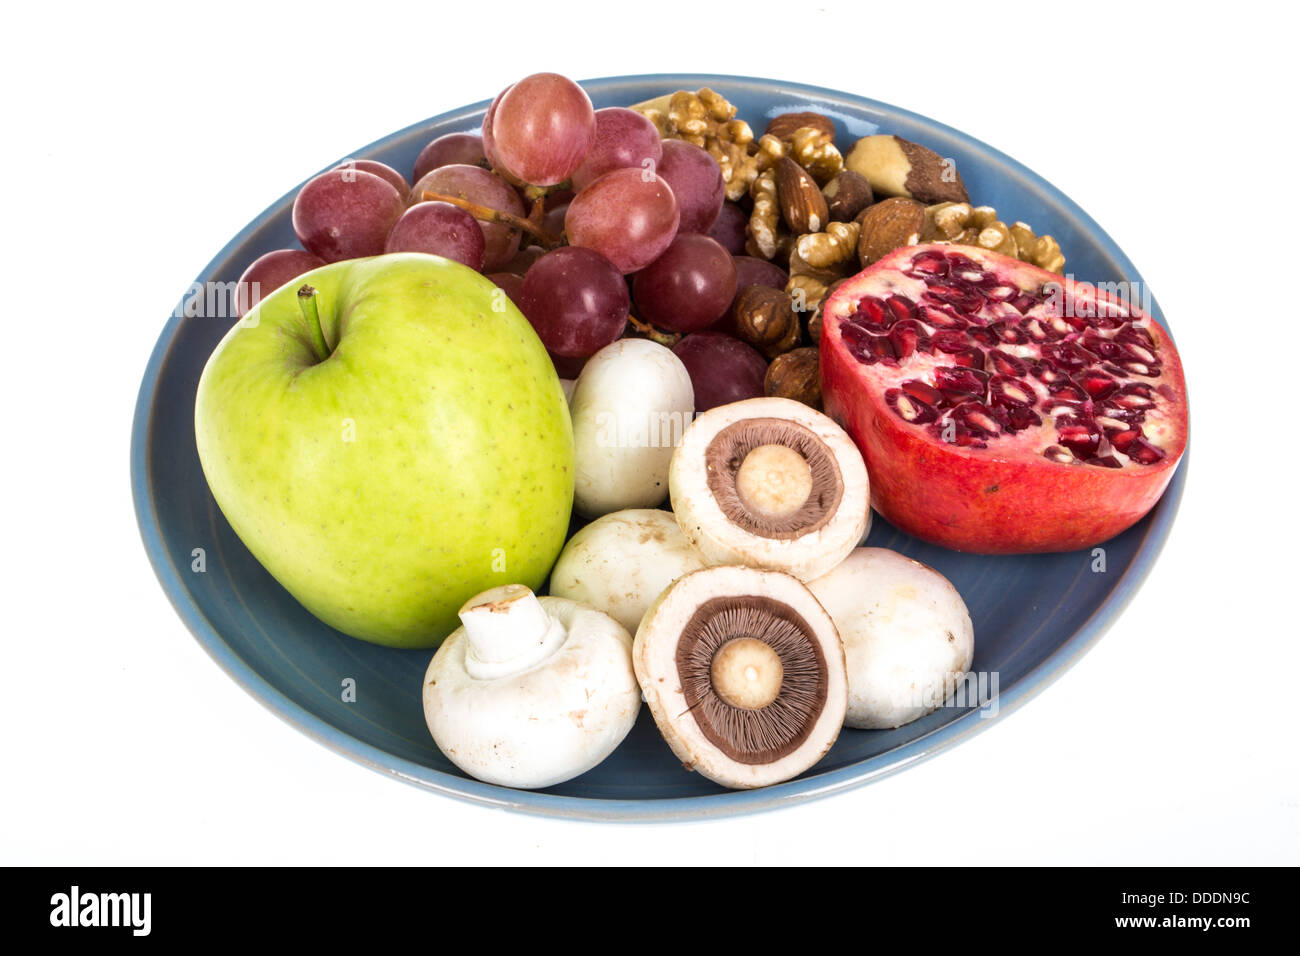 Mixed Plate of Fresh Fruit and Vegetables For a Healthy Low Fat Diet Stock Photo